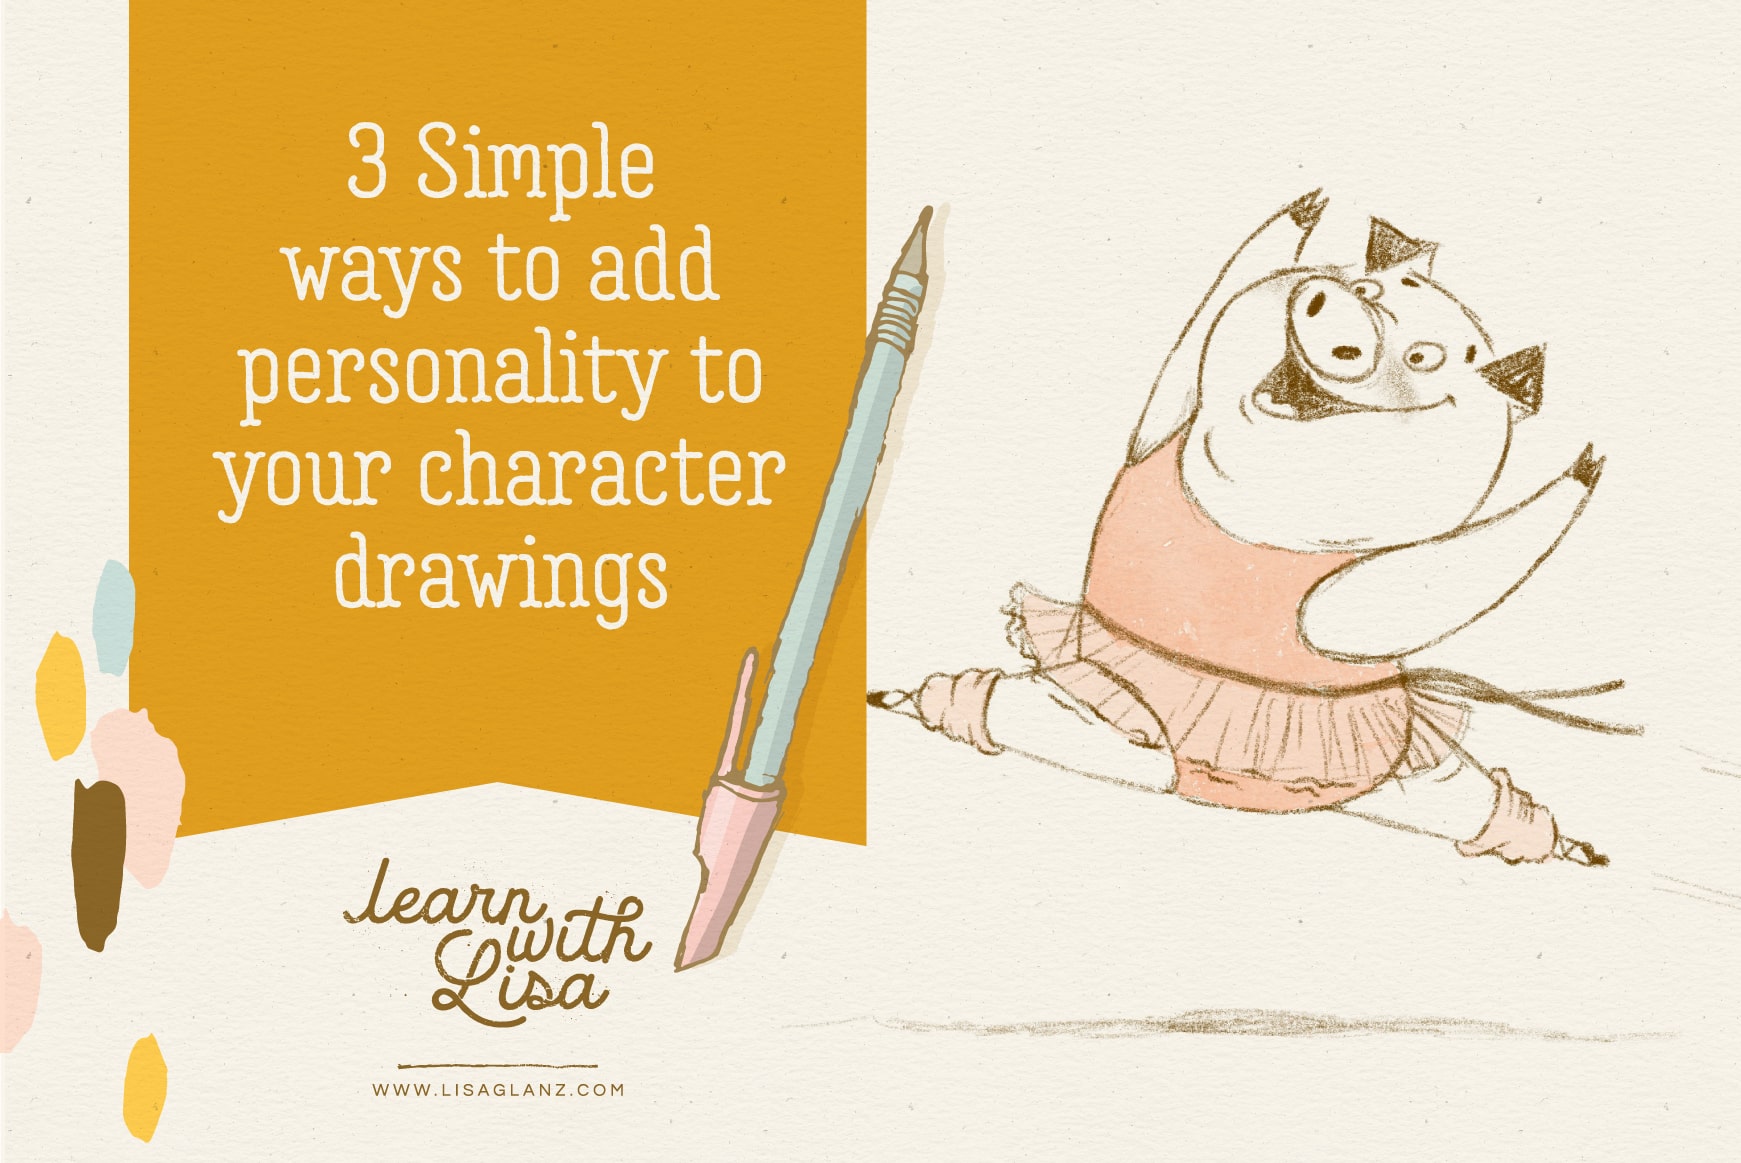 How to add personality to character drawings